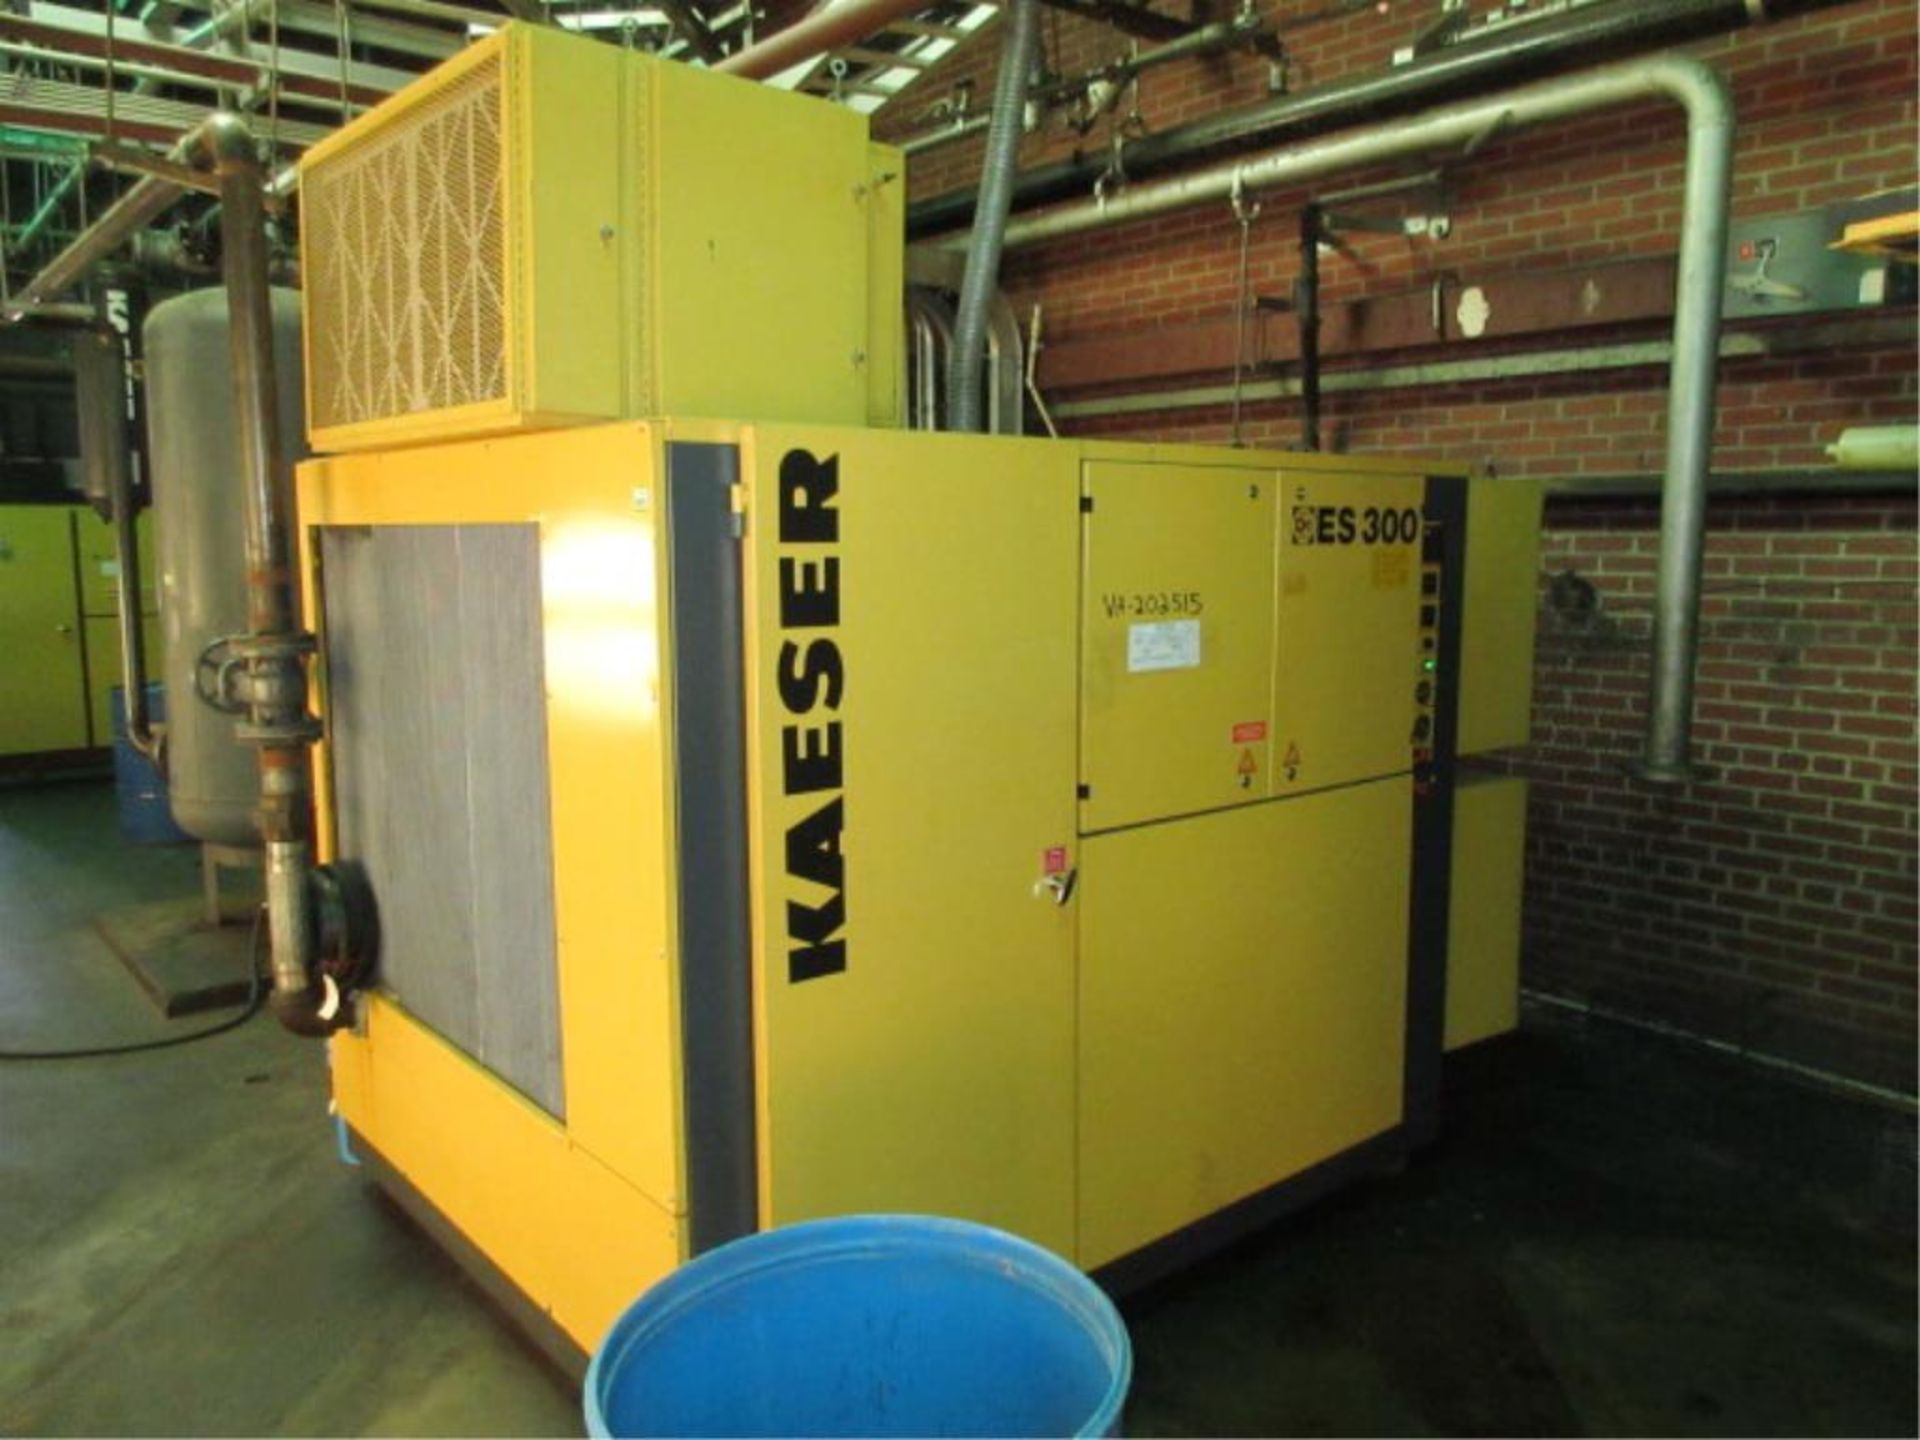 Kaeser ES 300 Sigma Profile Rotary Screw Air Compressor, (1995), service/load hrs. showing 1883/